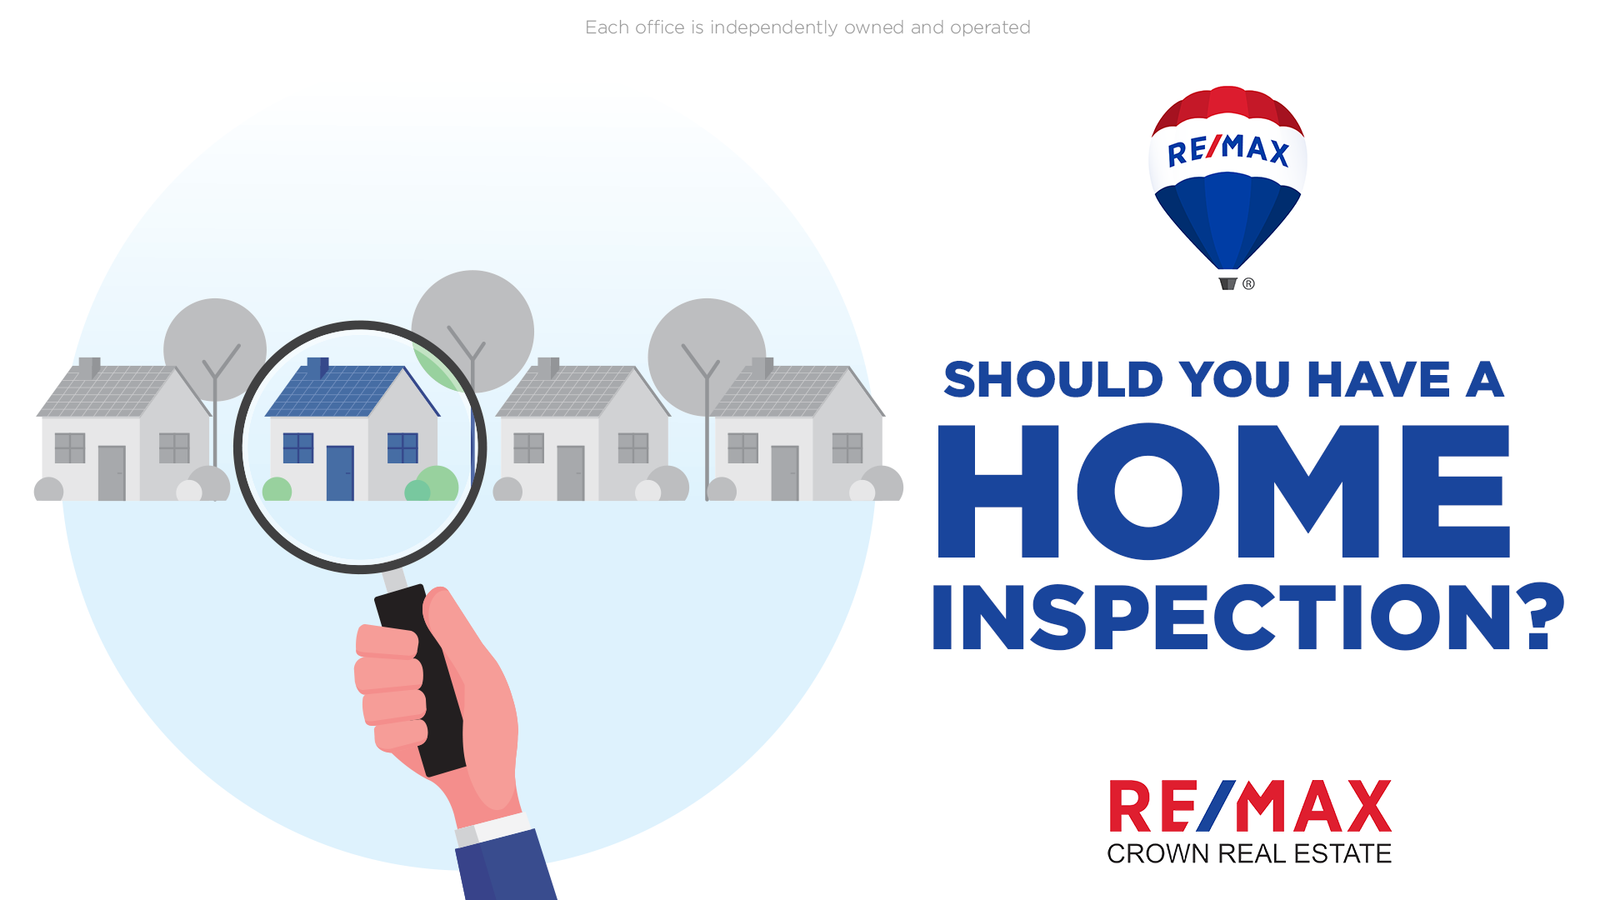 Should You Have a Home Inspection?